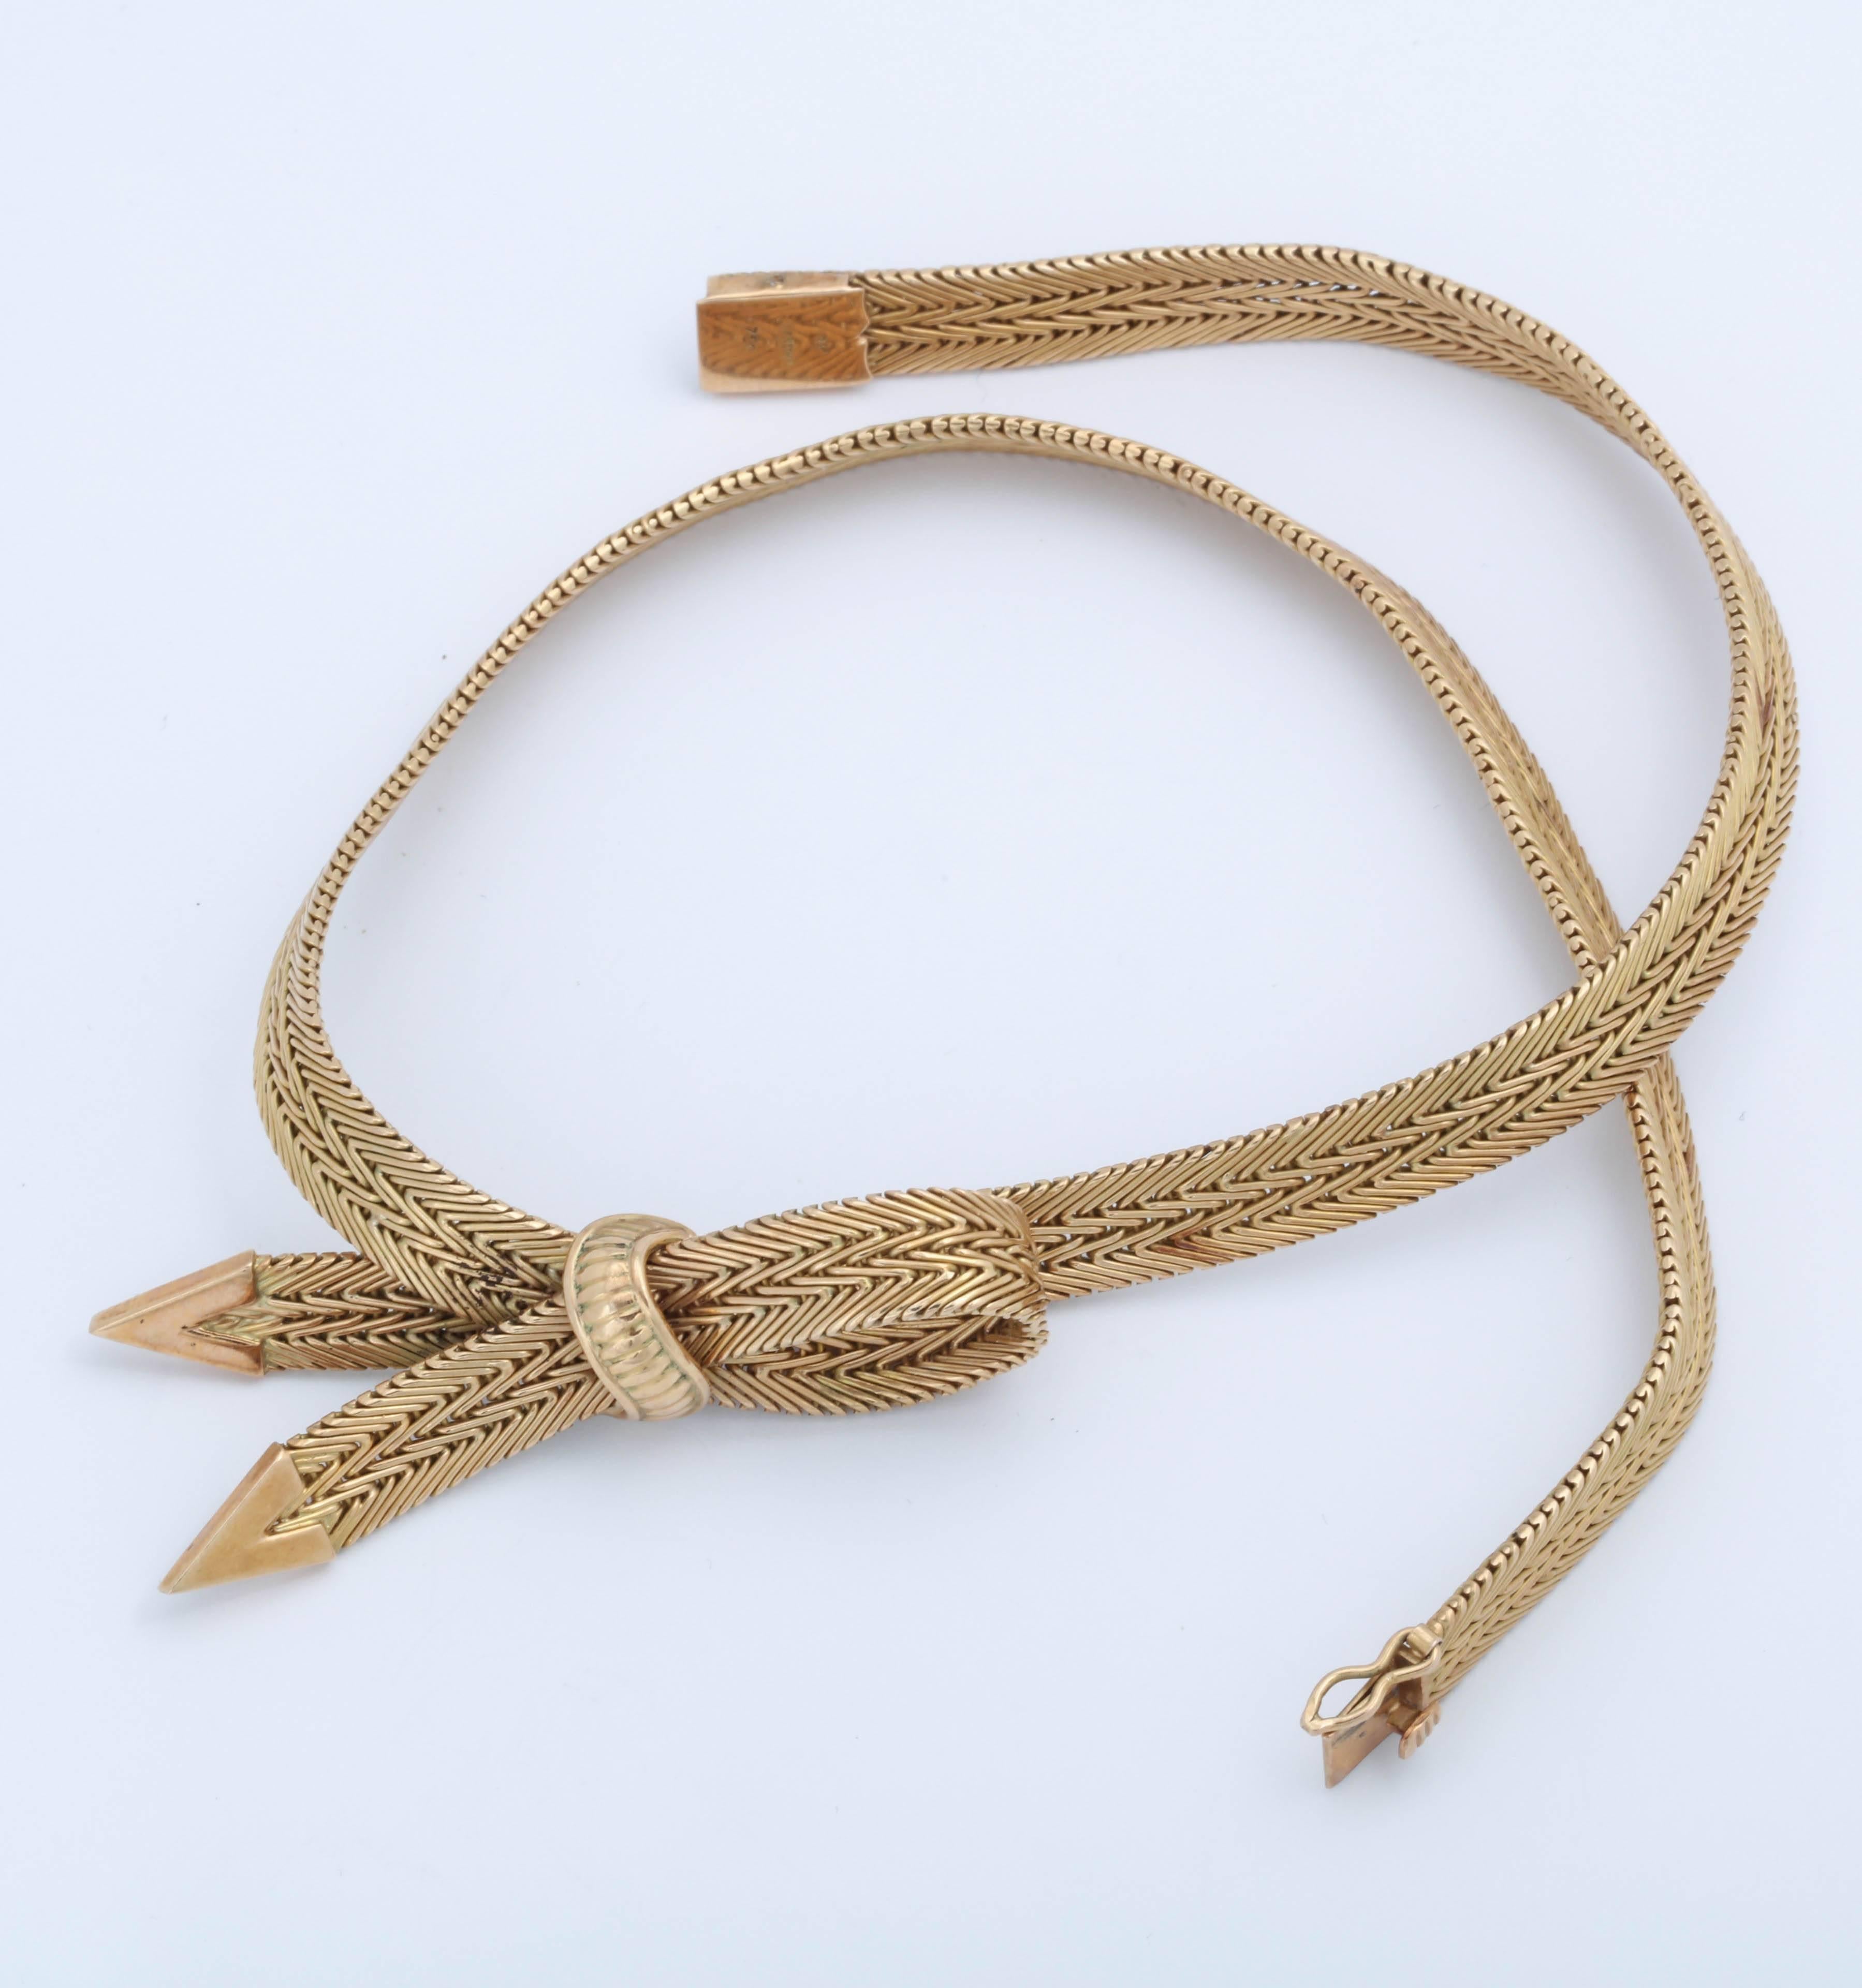 Woven Herringbone Necklace with Centre Bow 1